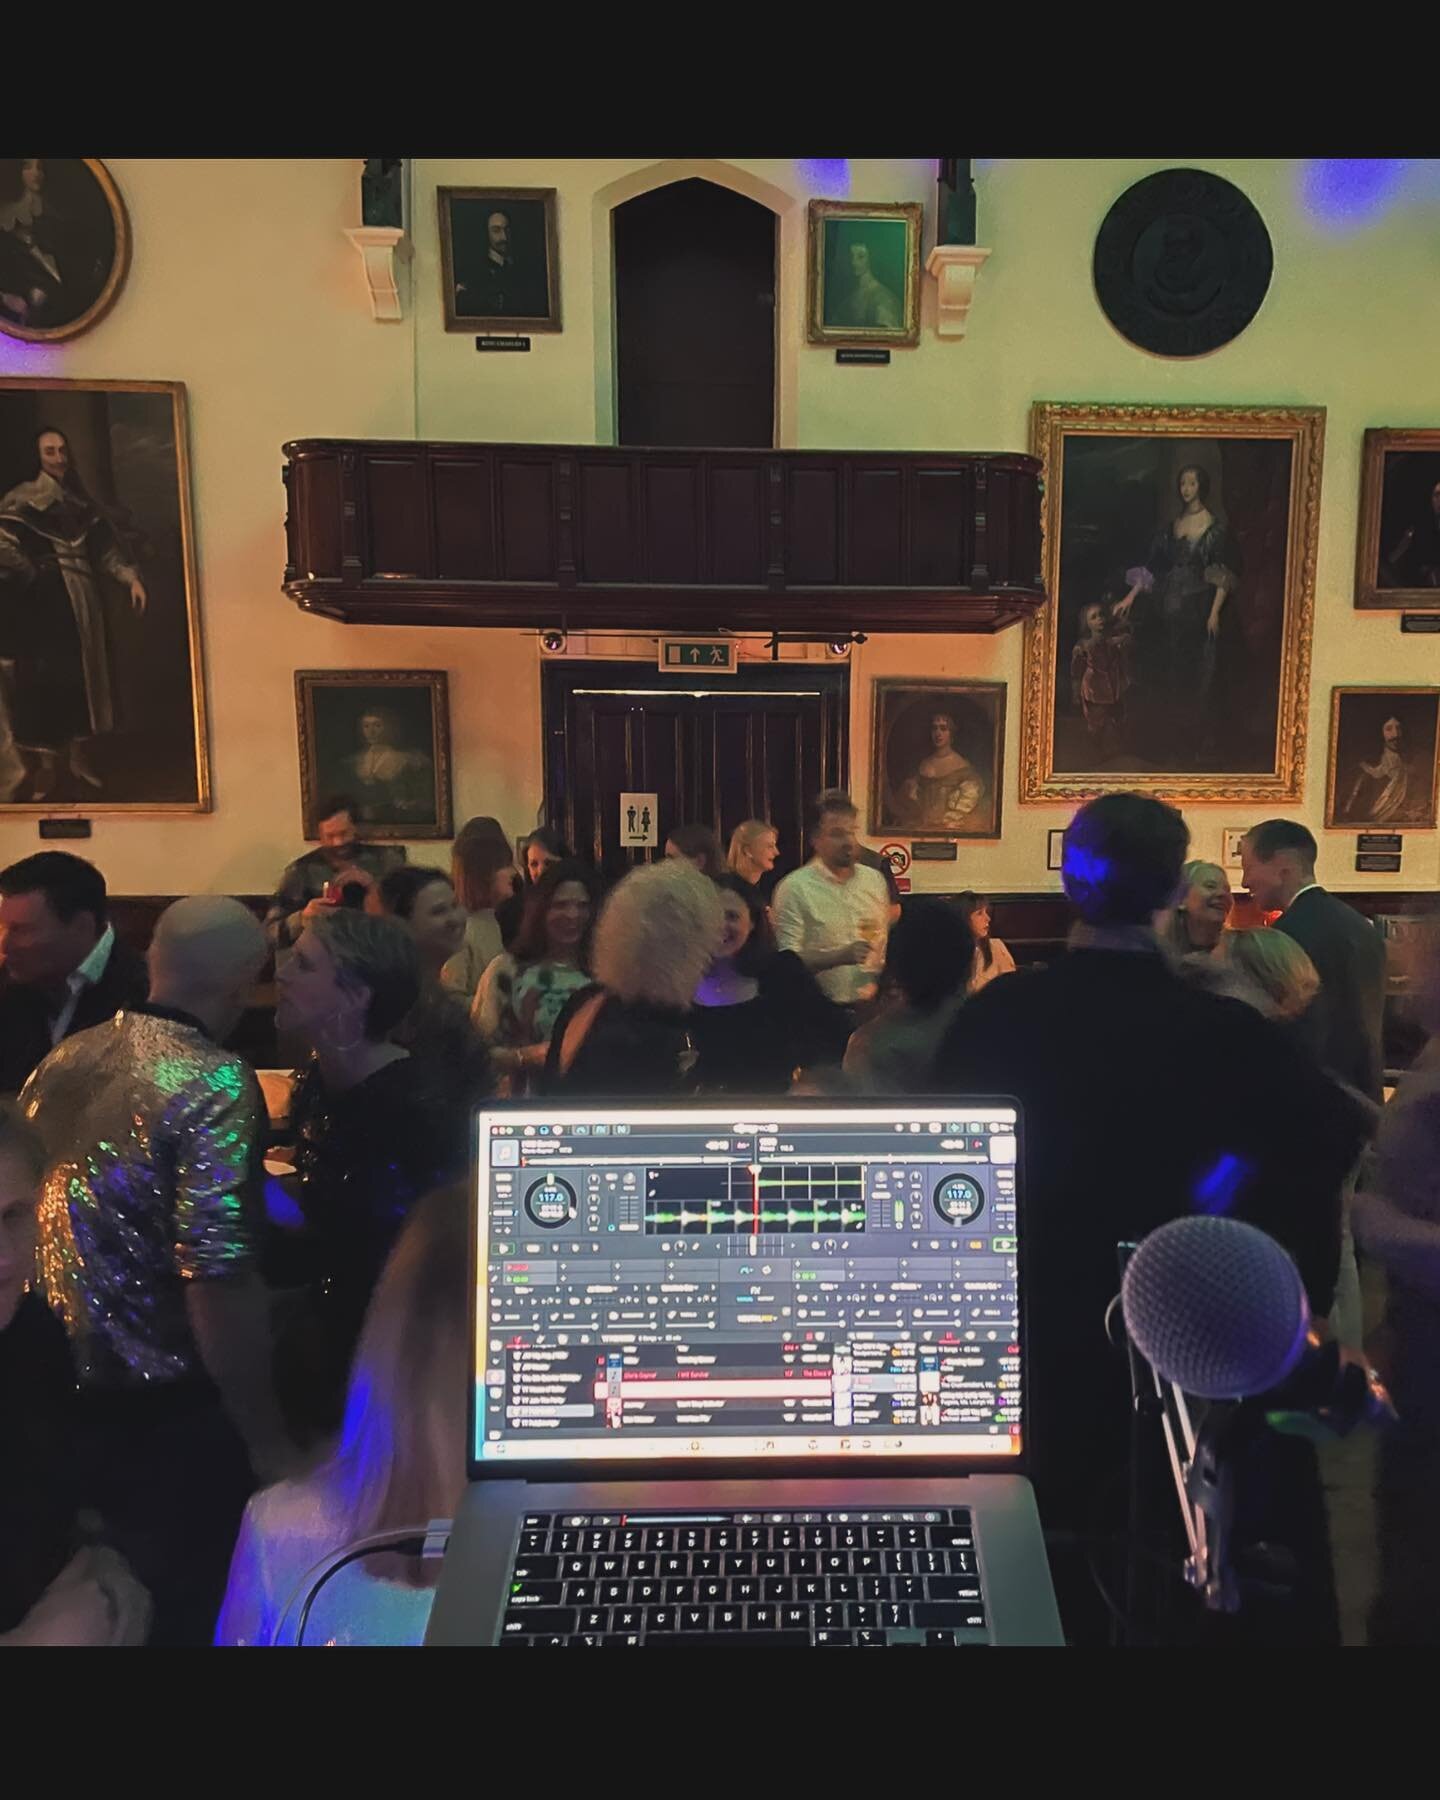 DJ Tim Titsworth Saturday 27th January 6-9pm
Need to celebrate the end of January? I have the perfect remedy&hellip;

Tim Titsworth is back this Saturday playing the best of funk, soul, disco, house, R&amp;B and a few things in between from 6-9pm. Th